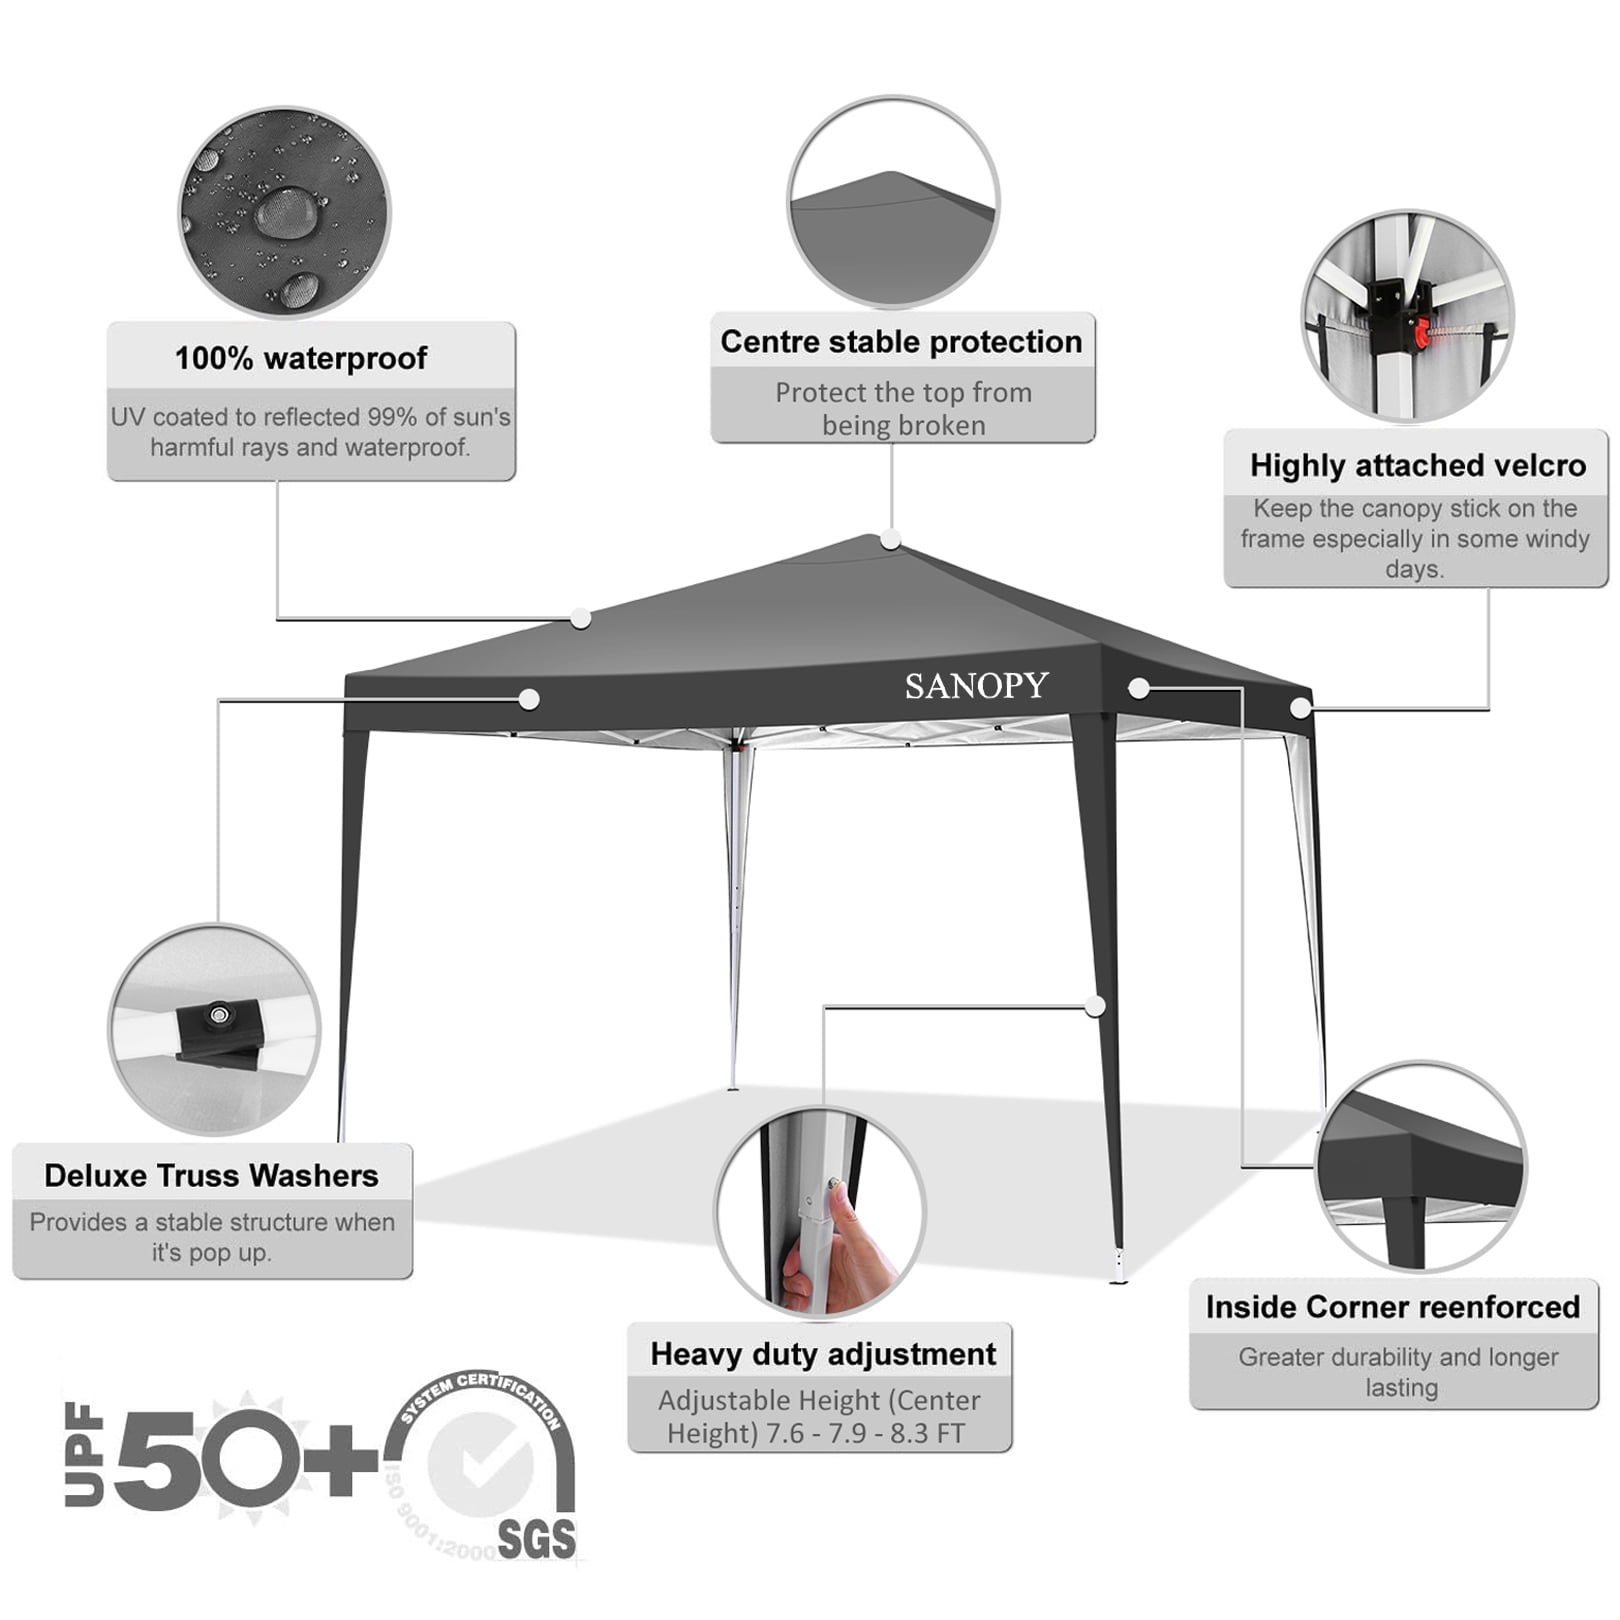 SANOPY 10'x10' EZ Pop Up Canopy Tent Outdoor Party Instant Shelter Portable Folding Beach Canopy with 4 Sandbag & Carrying Bag, Black